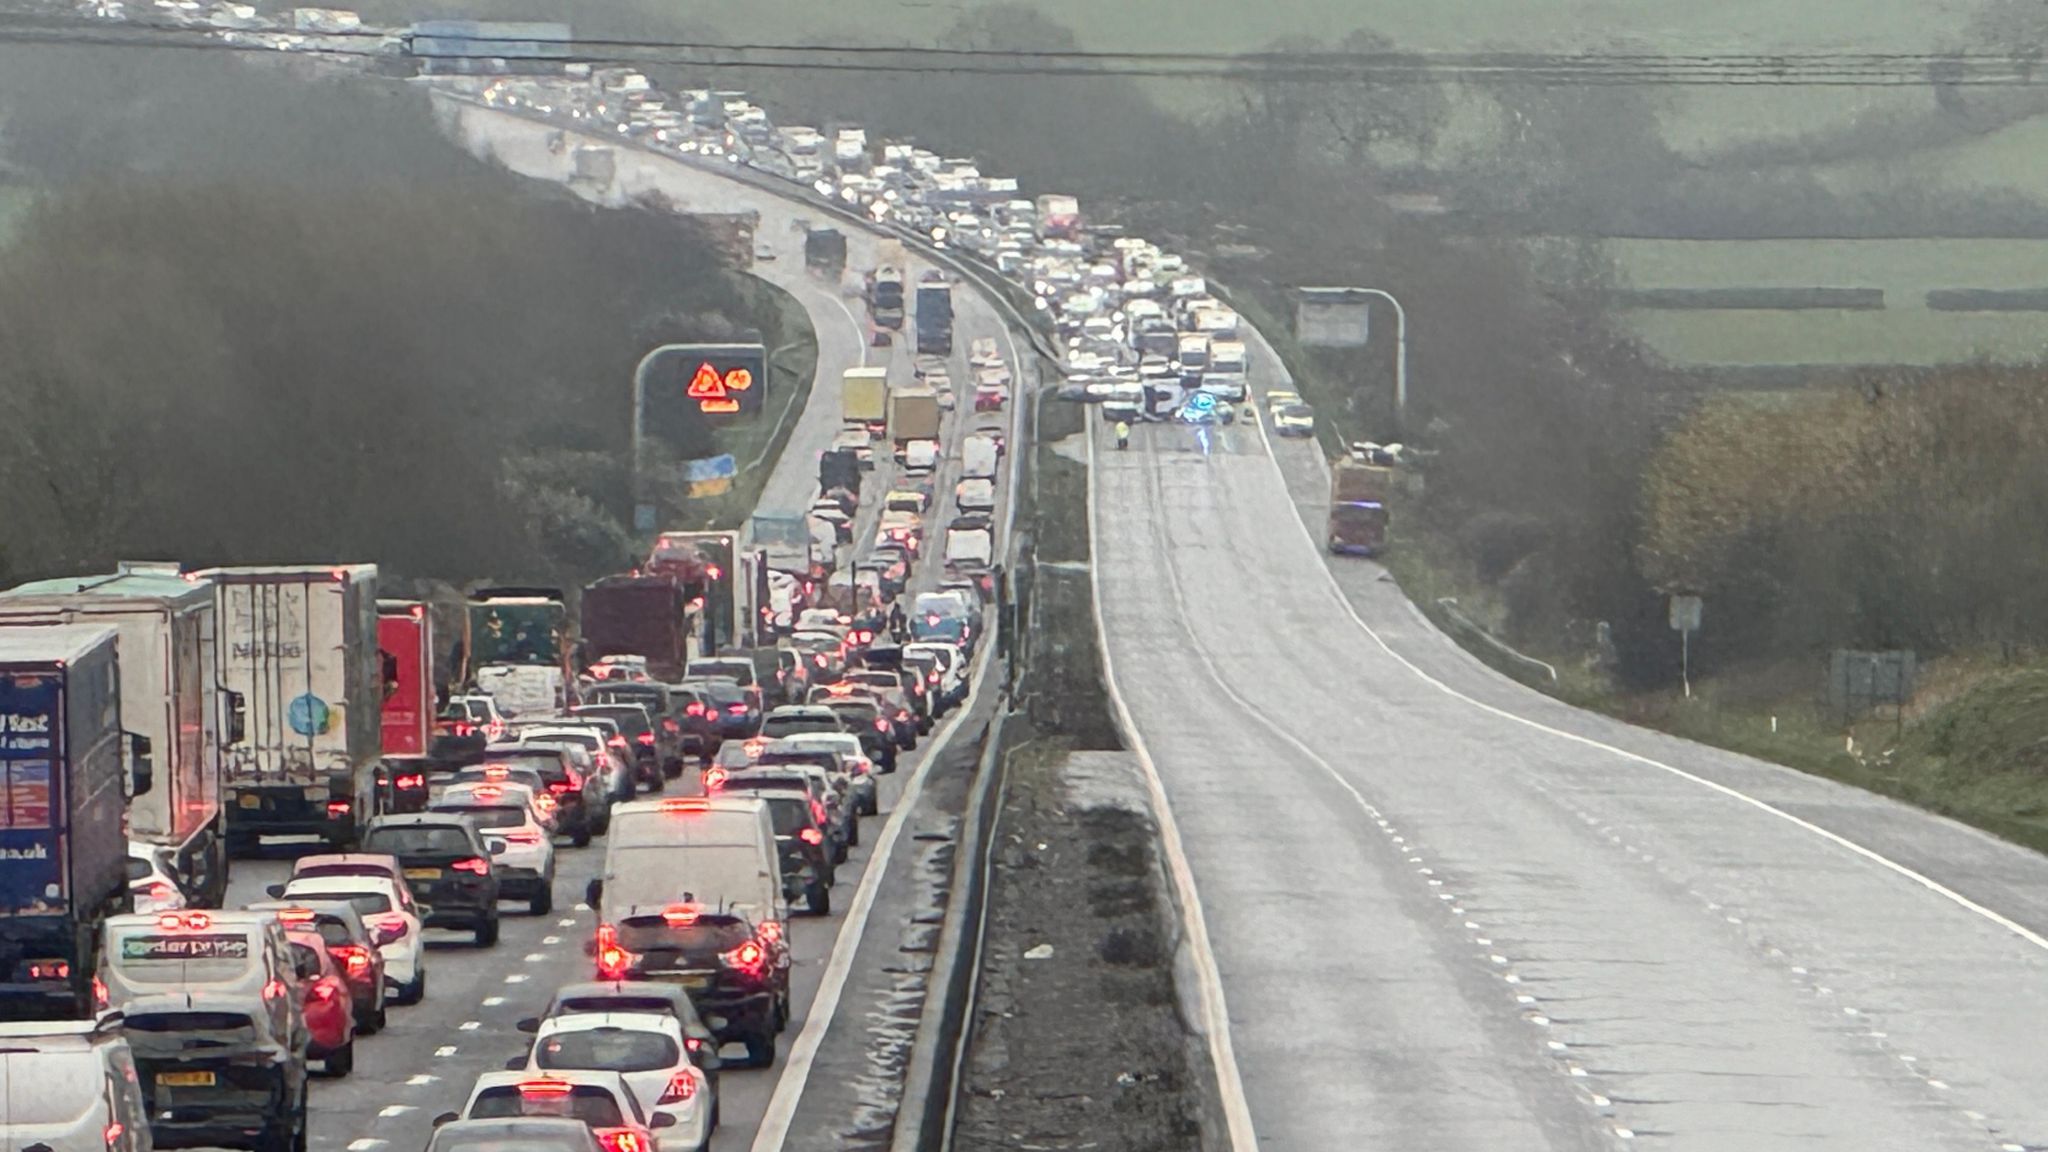 Traffic backing up on the M4